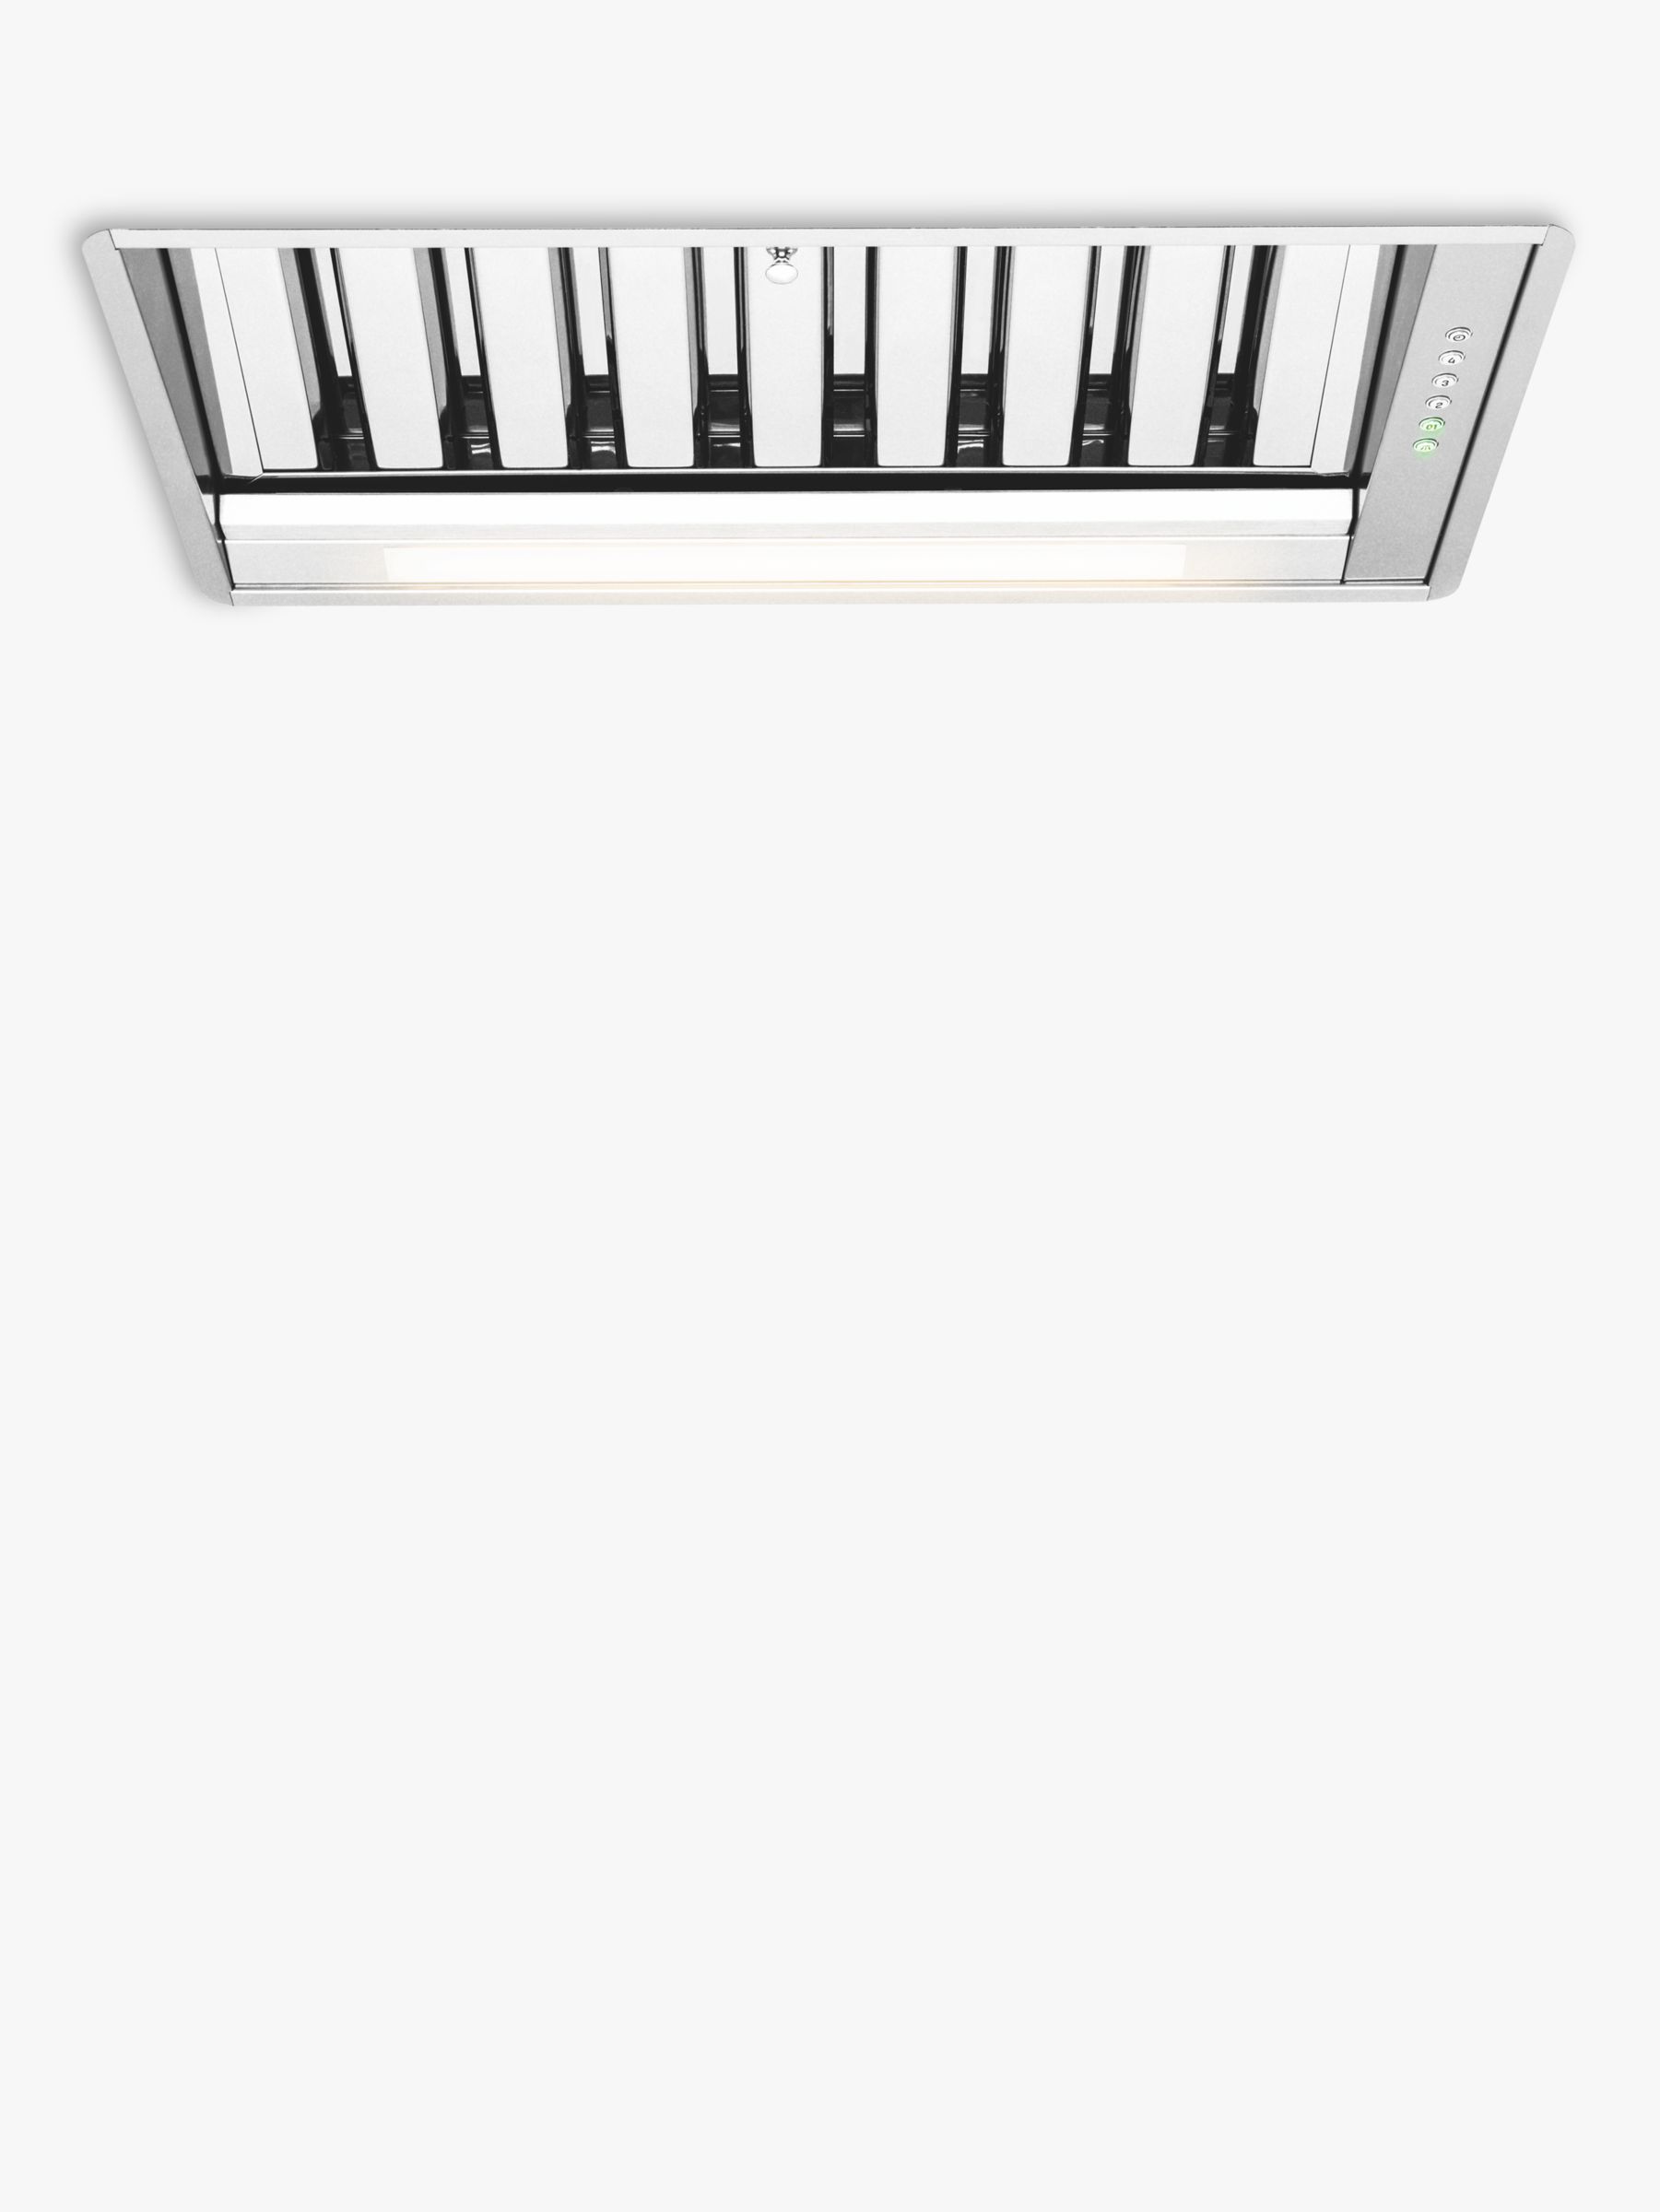 John Lewis & Partners JLCHI5201 Canopy Cooker Hood with Baffle Filter, Stainless Steel